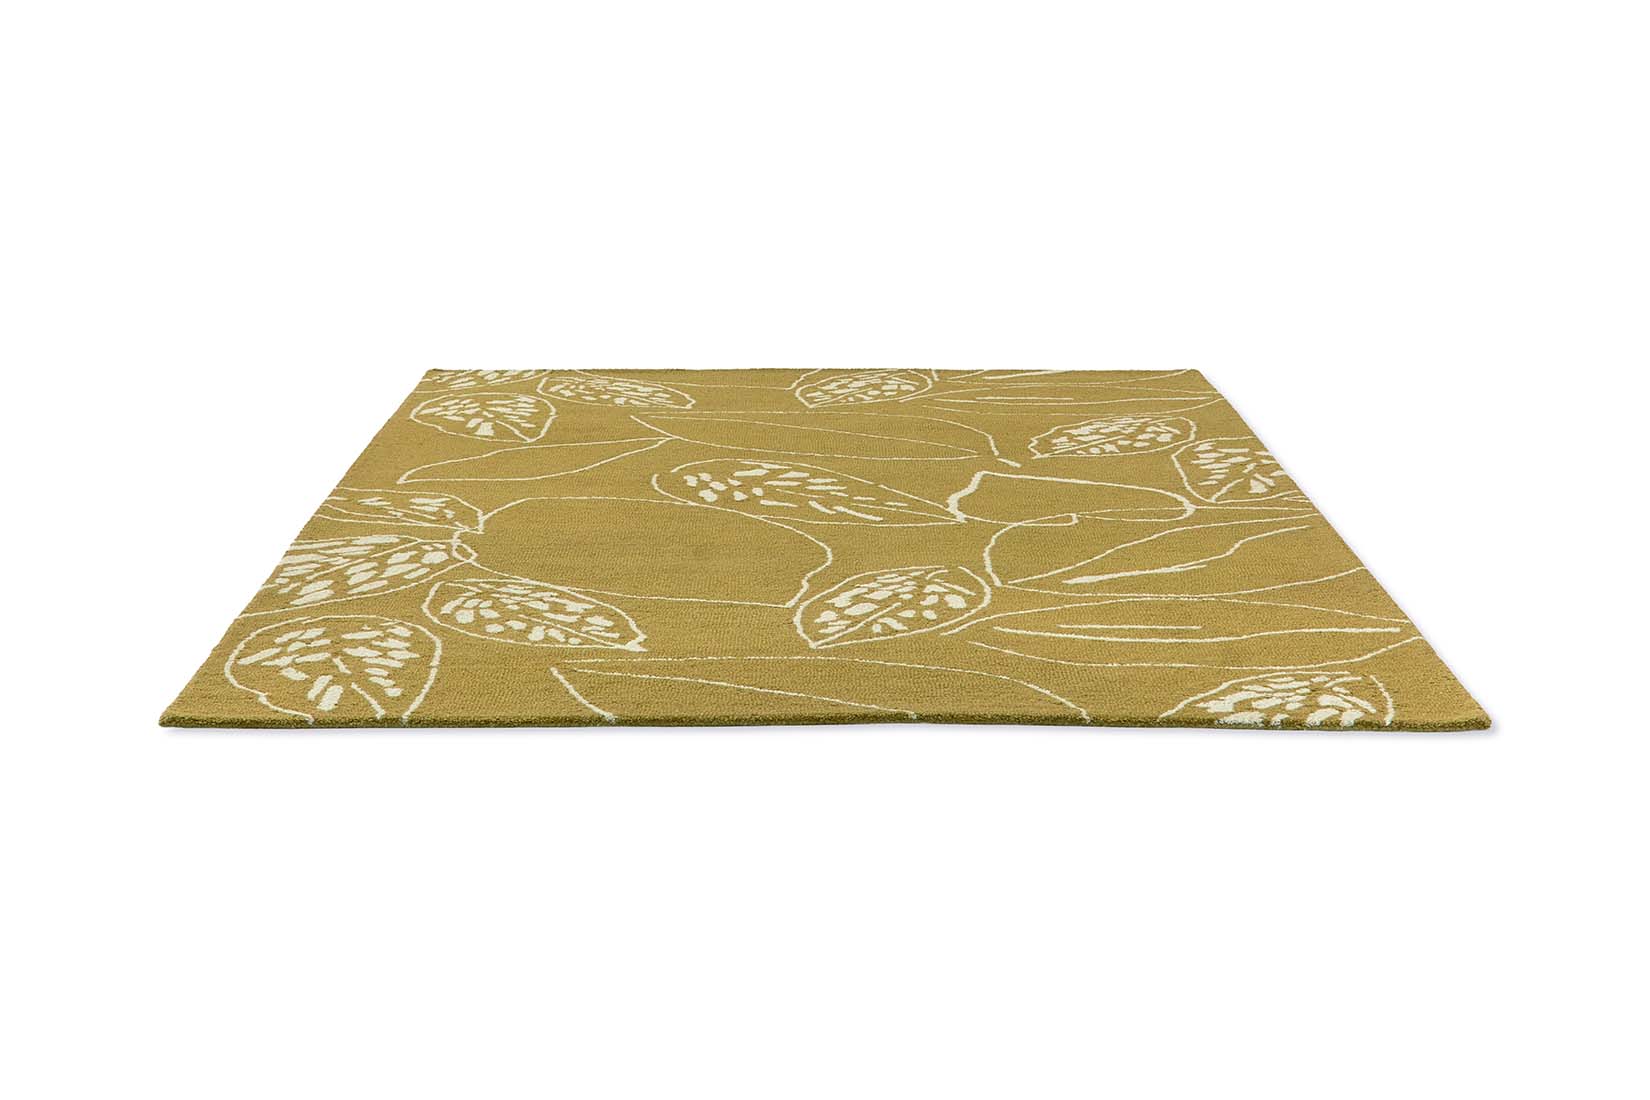 yellow rug with floral pattern
